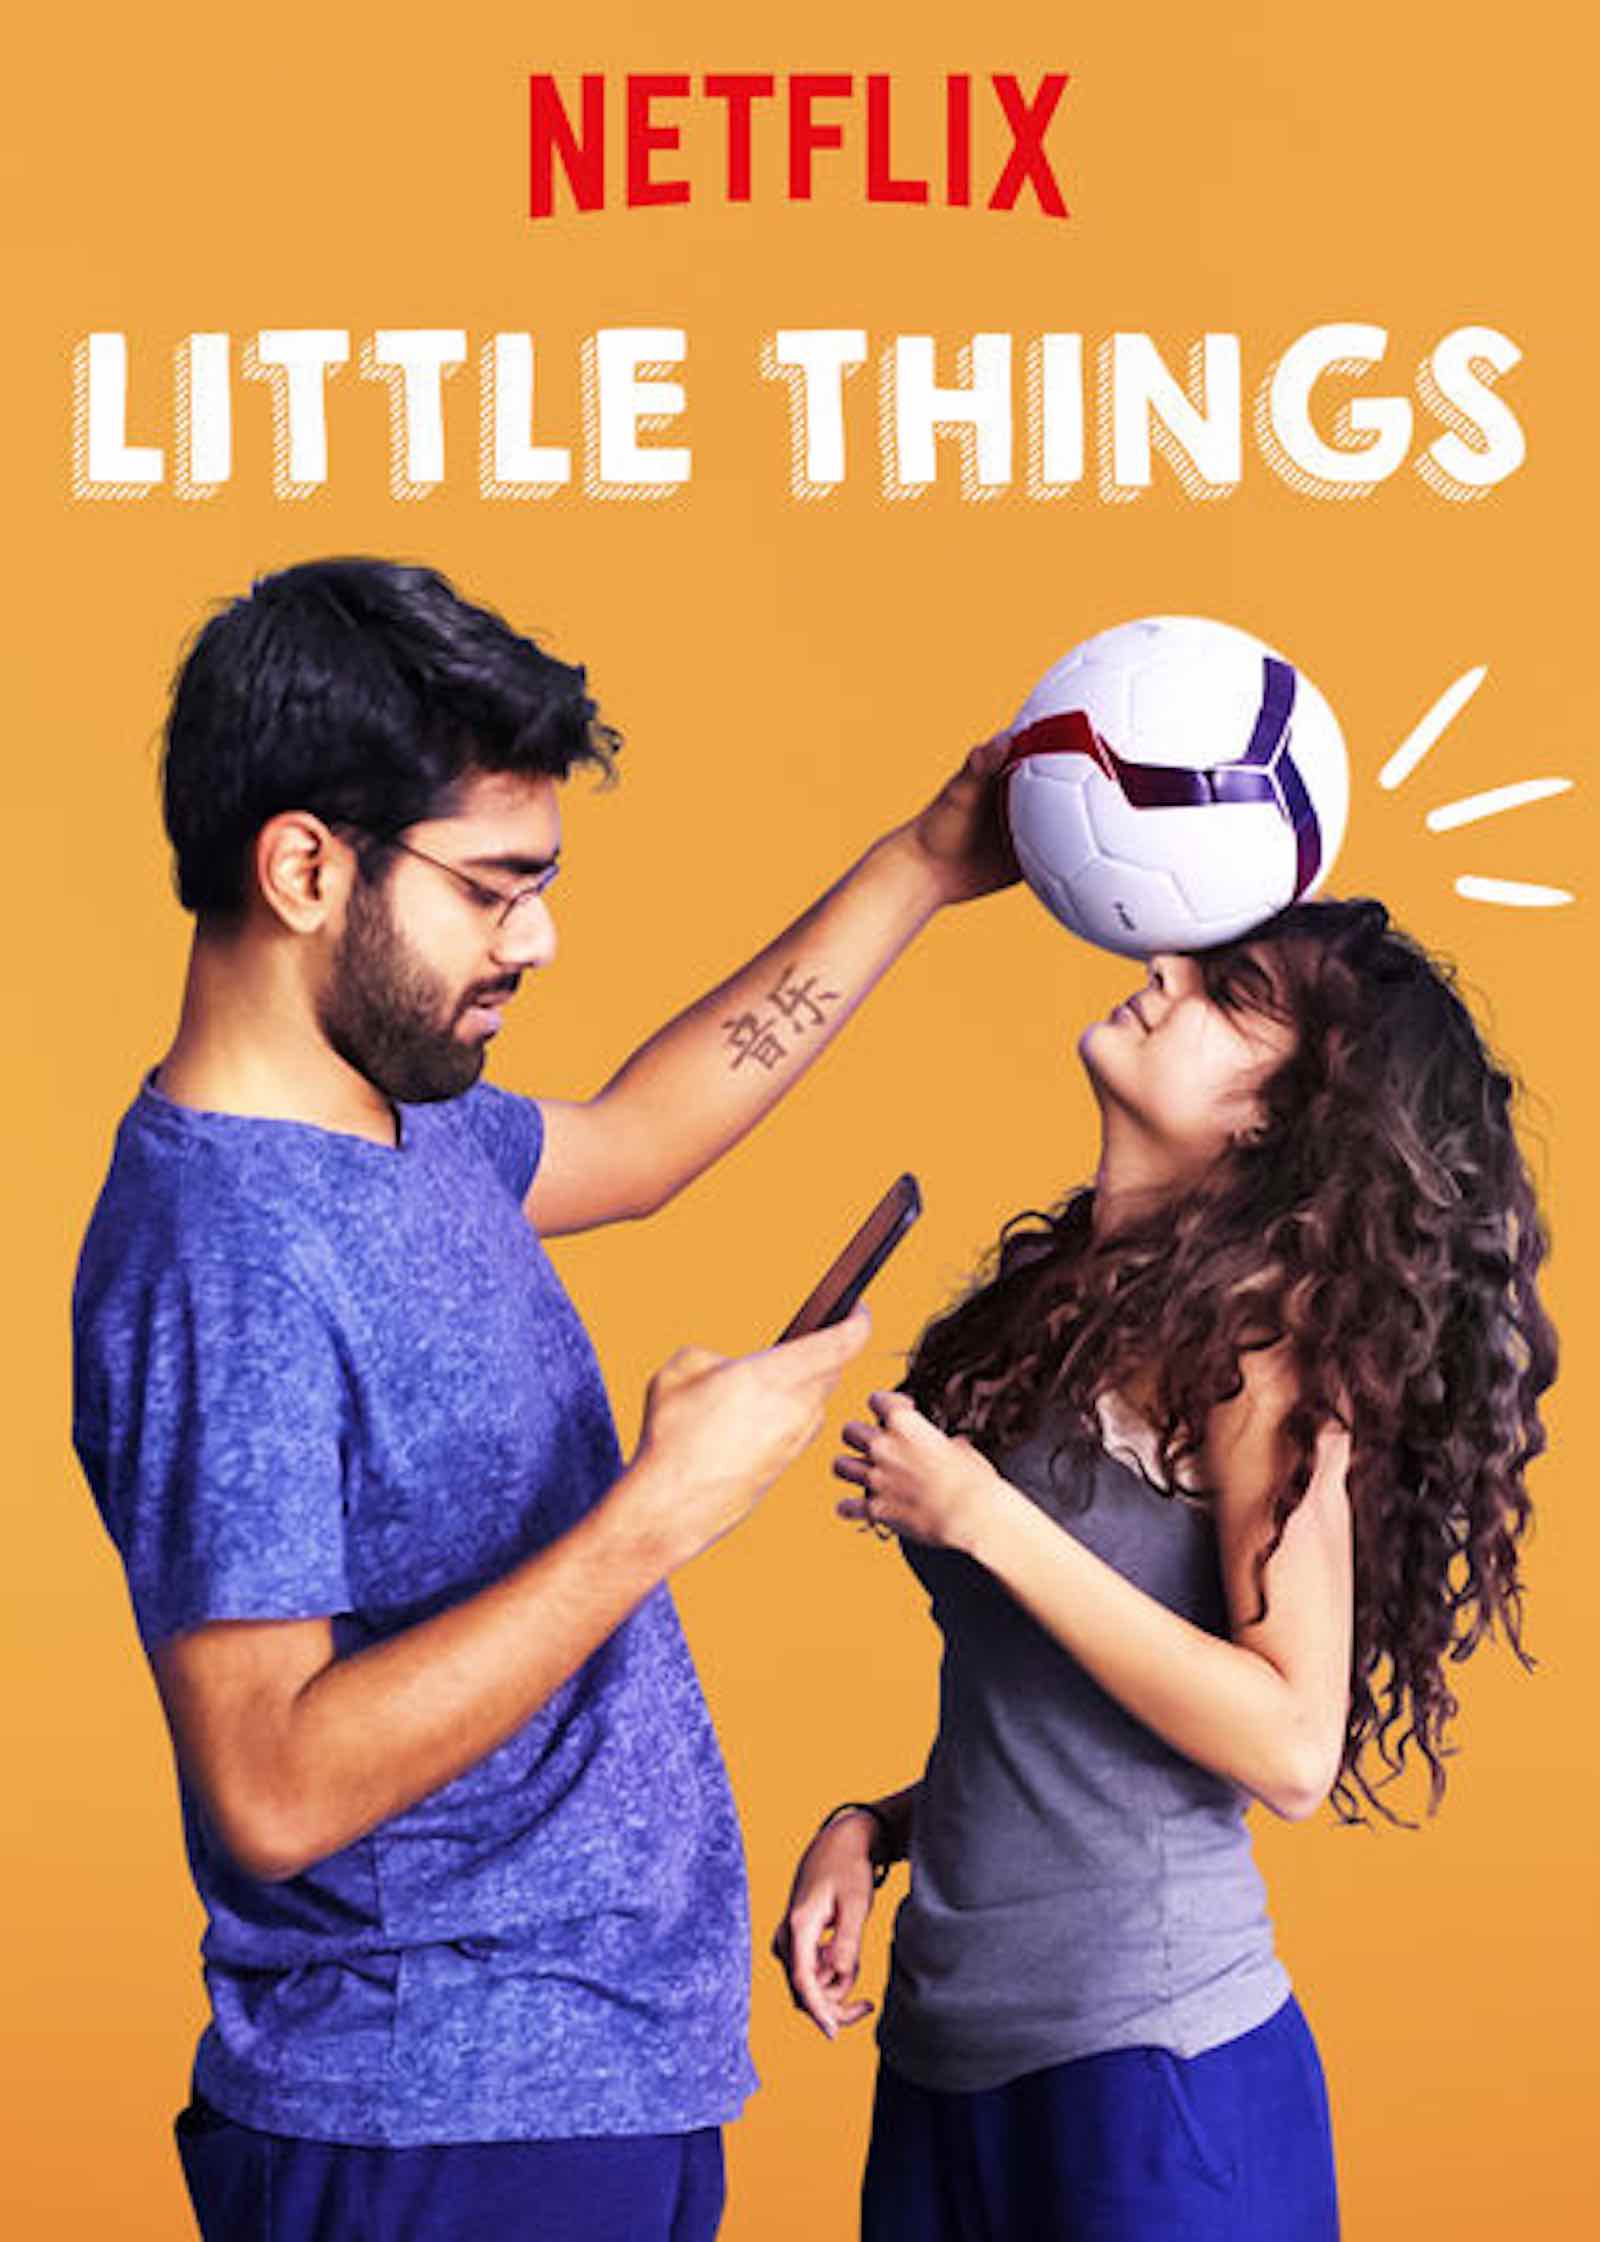 Is Little Things on Netflix